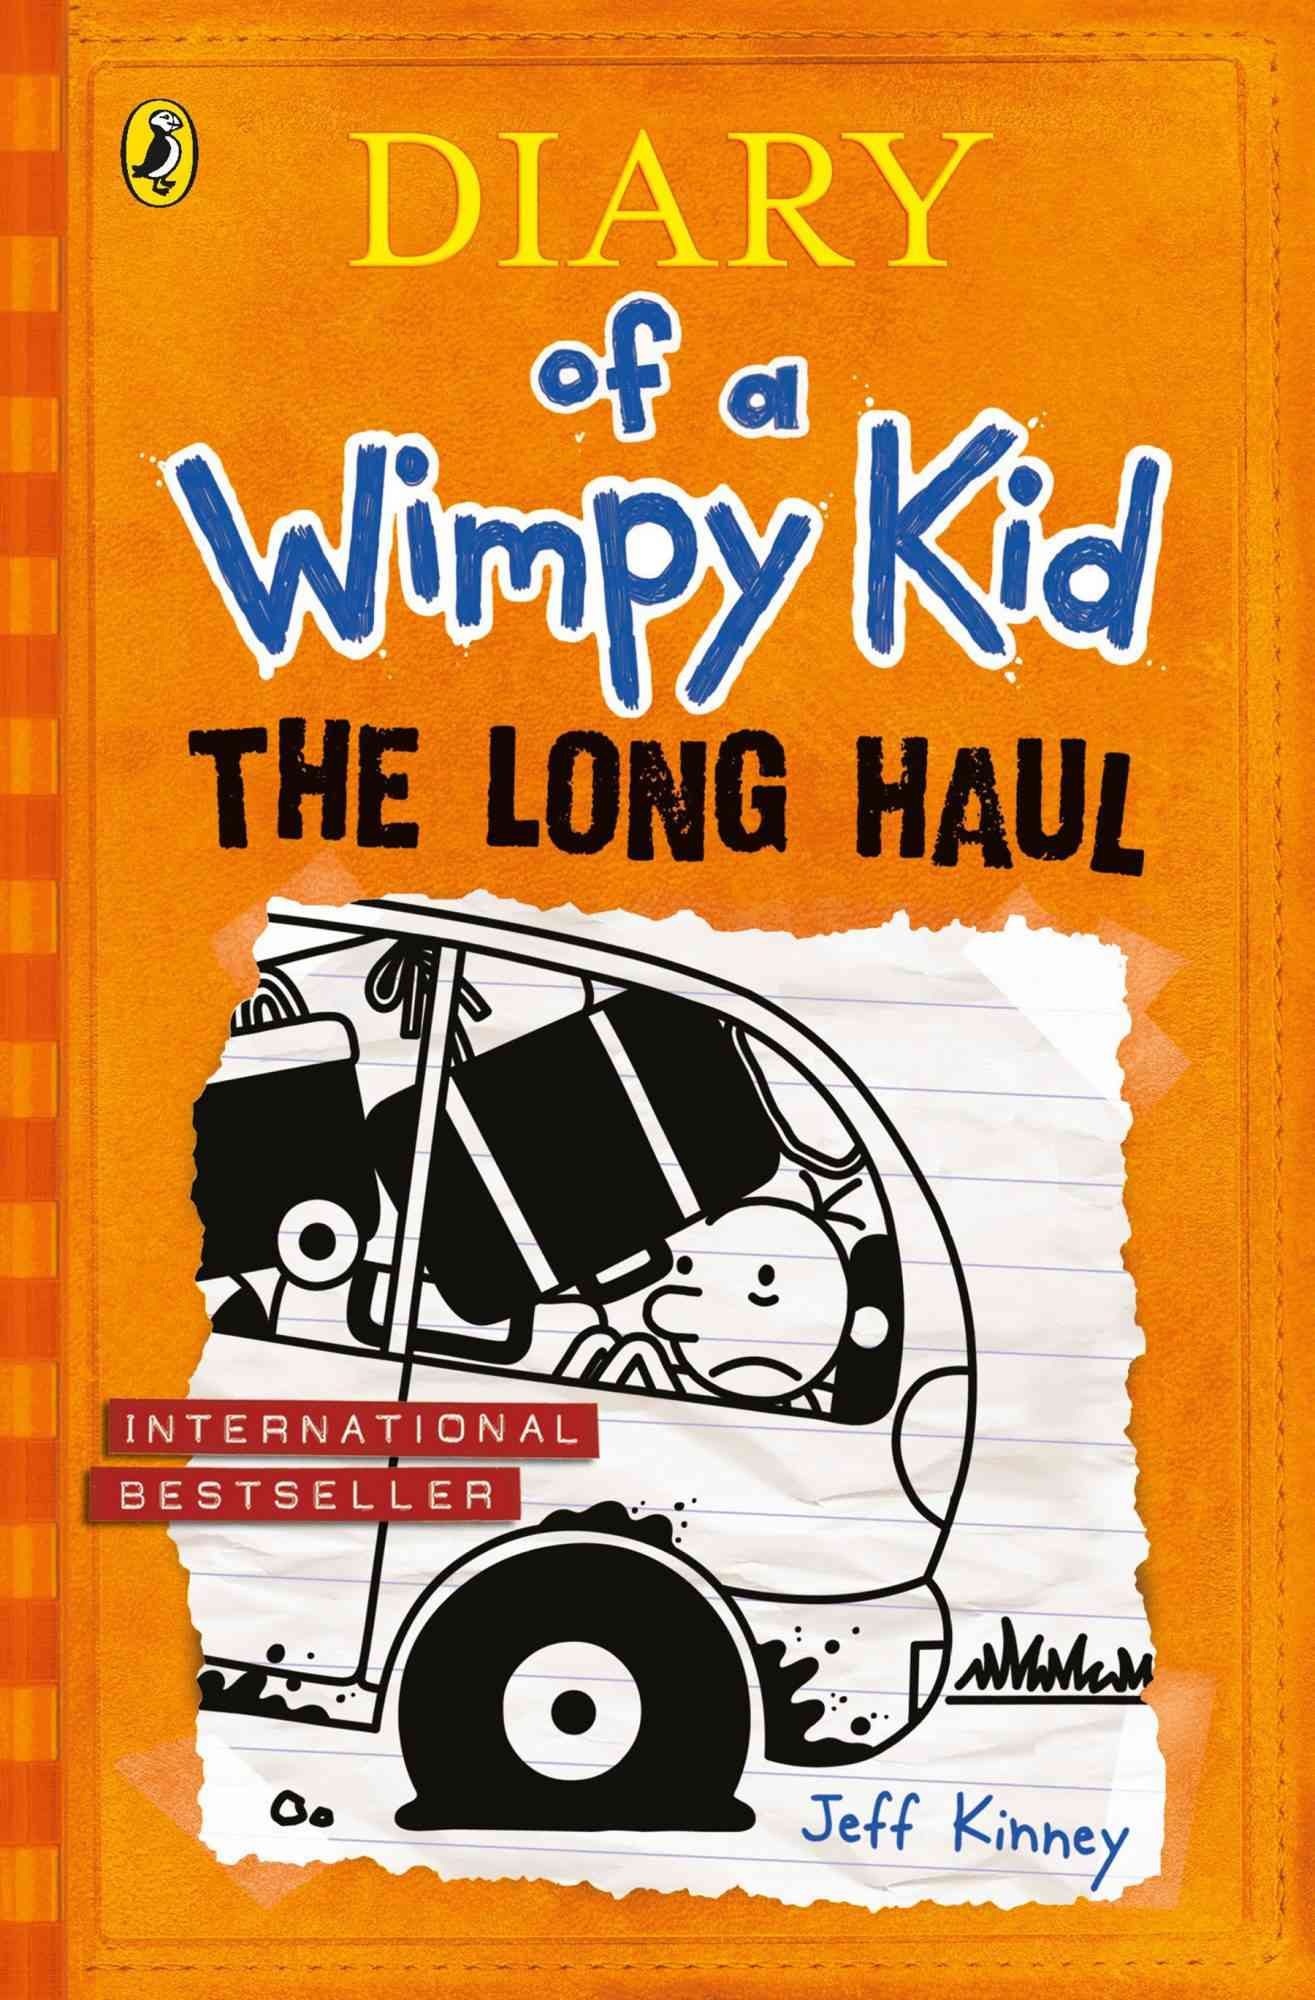 Diary of a Wimpy Kid: The Long Haul, May 19